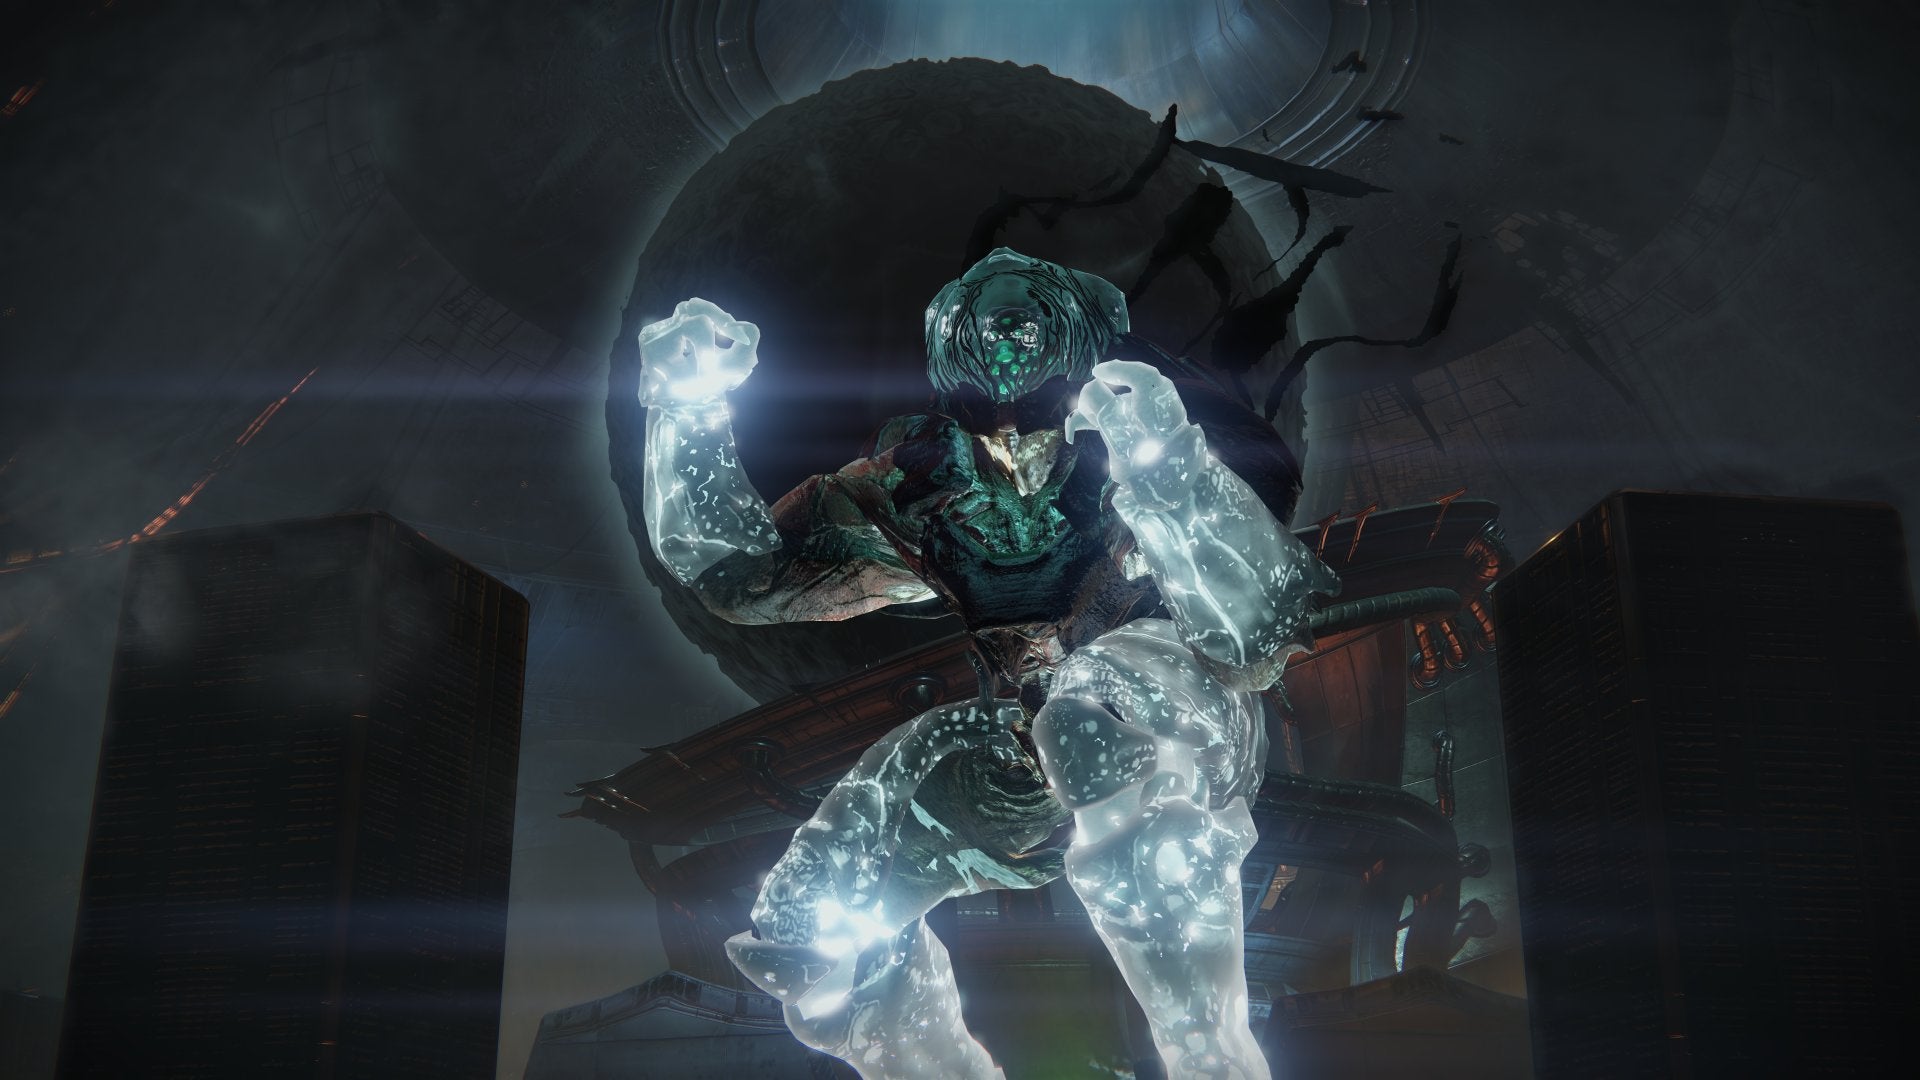 Destiny April update: here's a look at the new Strikes, Prison of Elde...